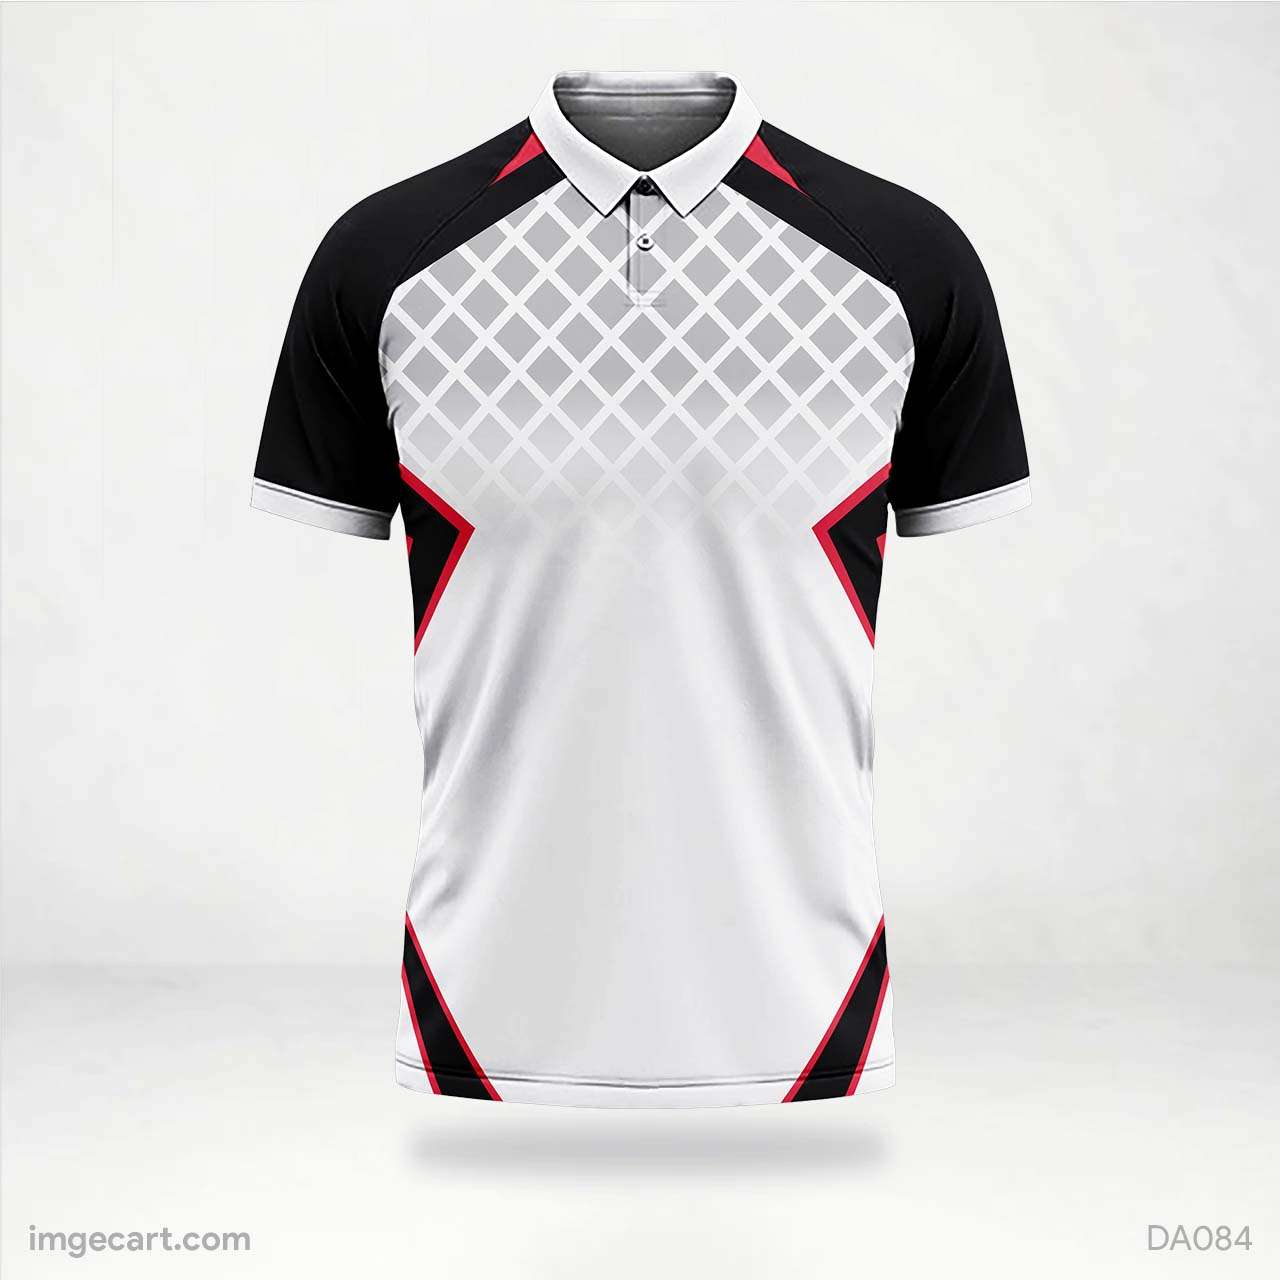 red and white jersey design